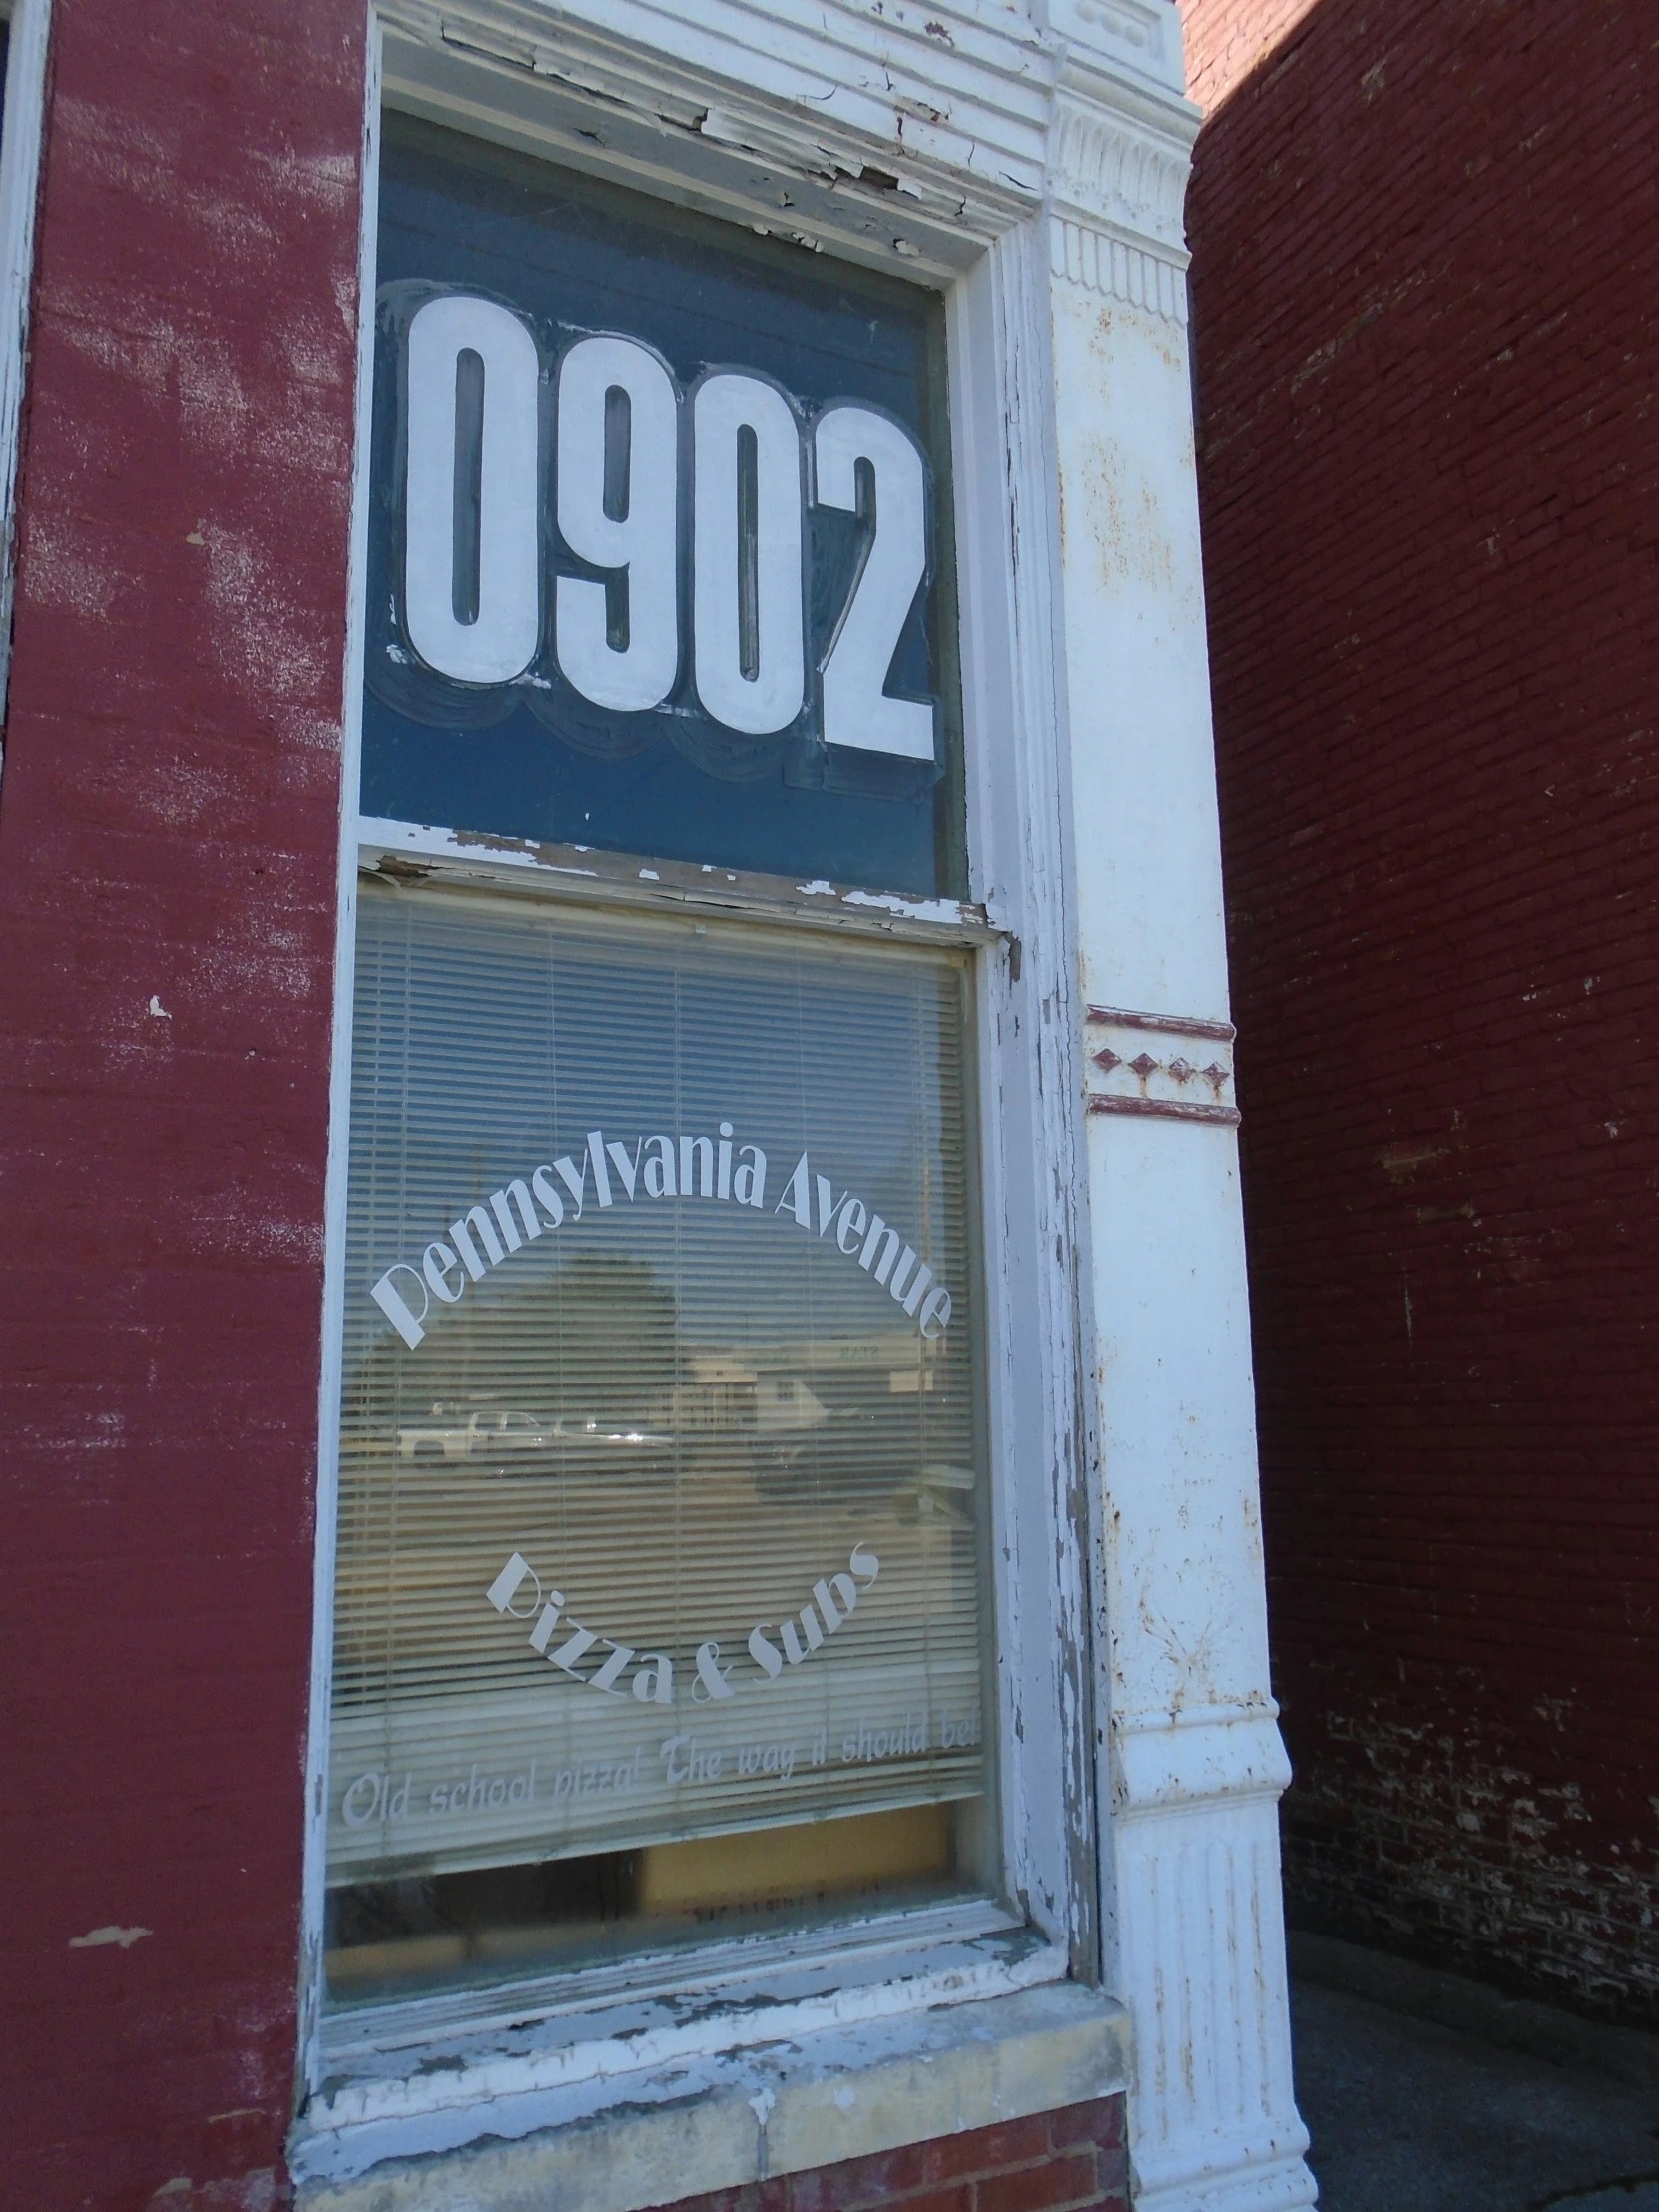 an old window with a sign that reads 0902 and the word, pennsylvania adams